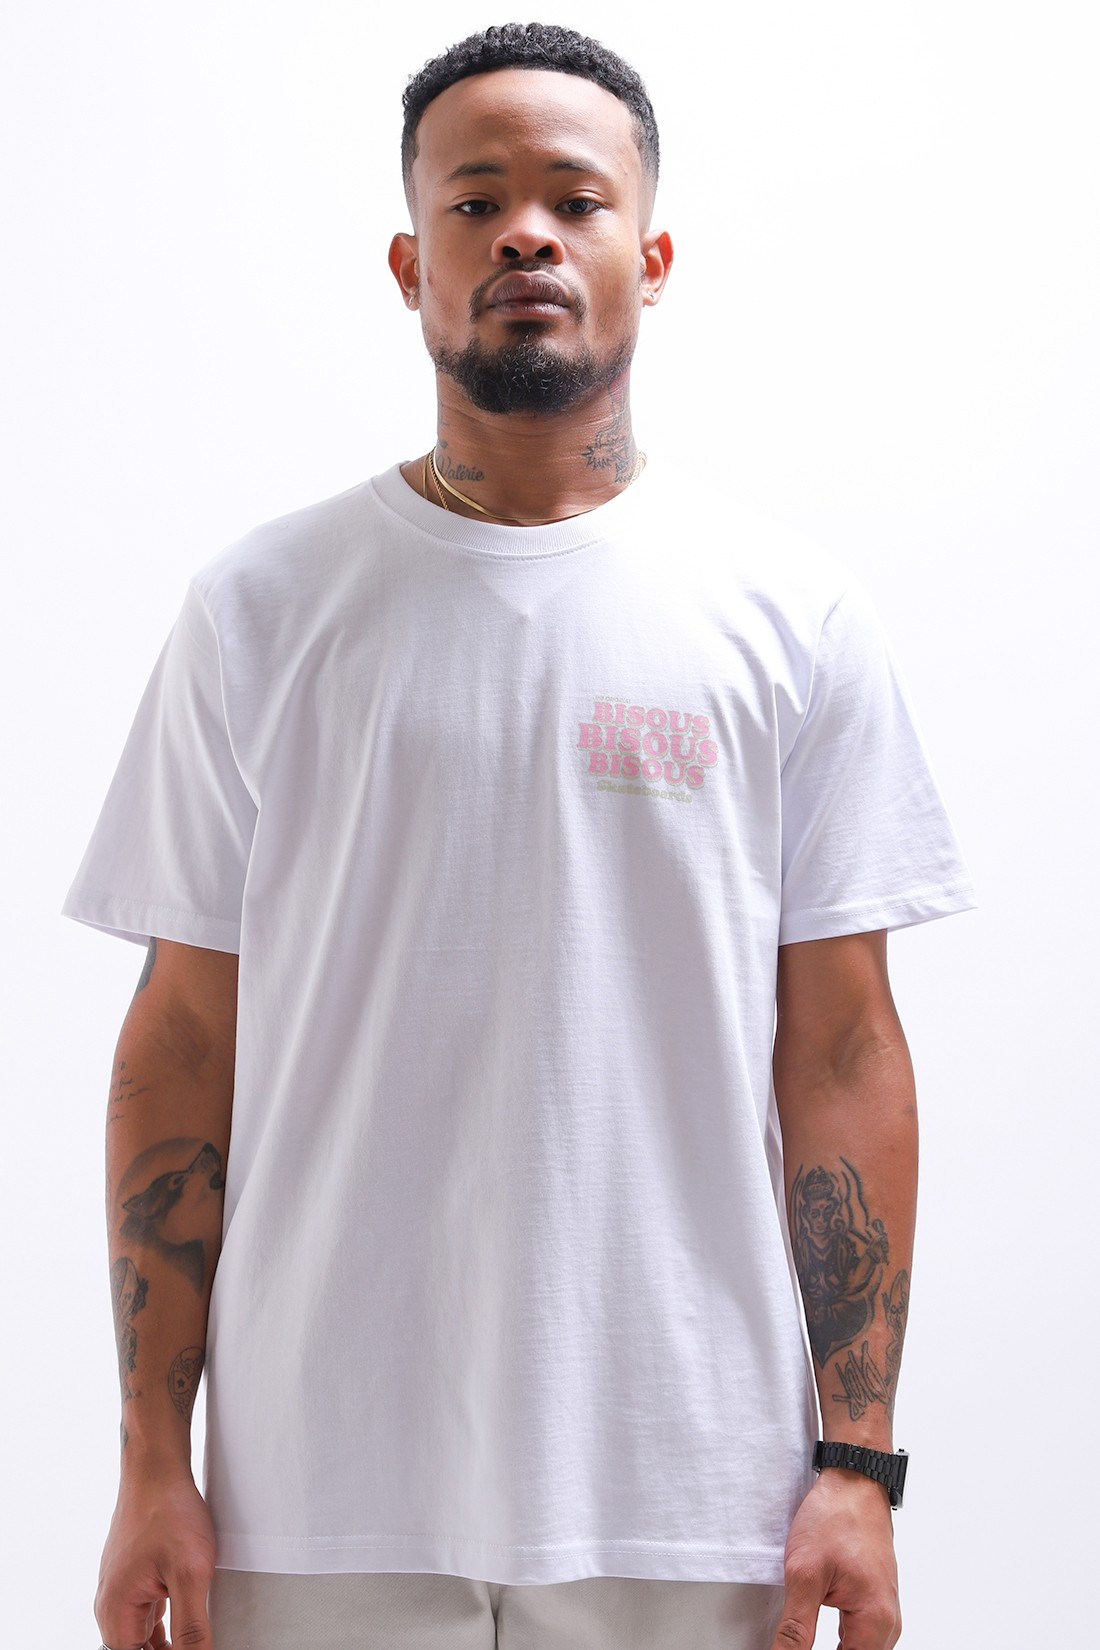 BISOUS SKATEBOARDS / T-shirt grease white White